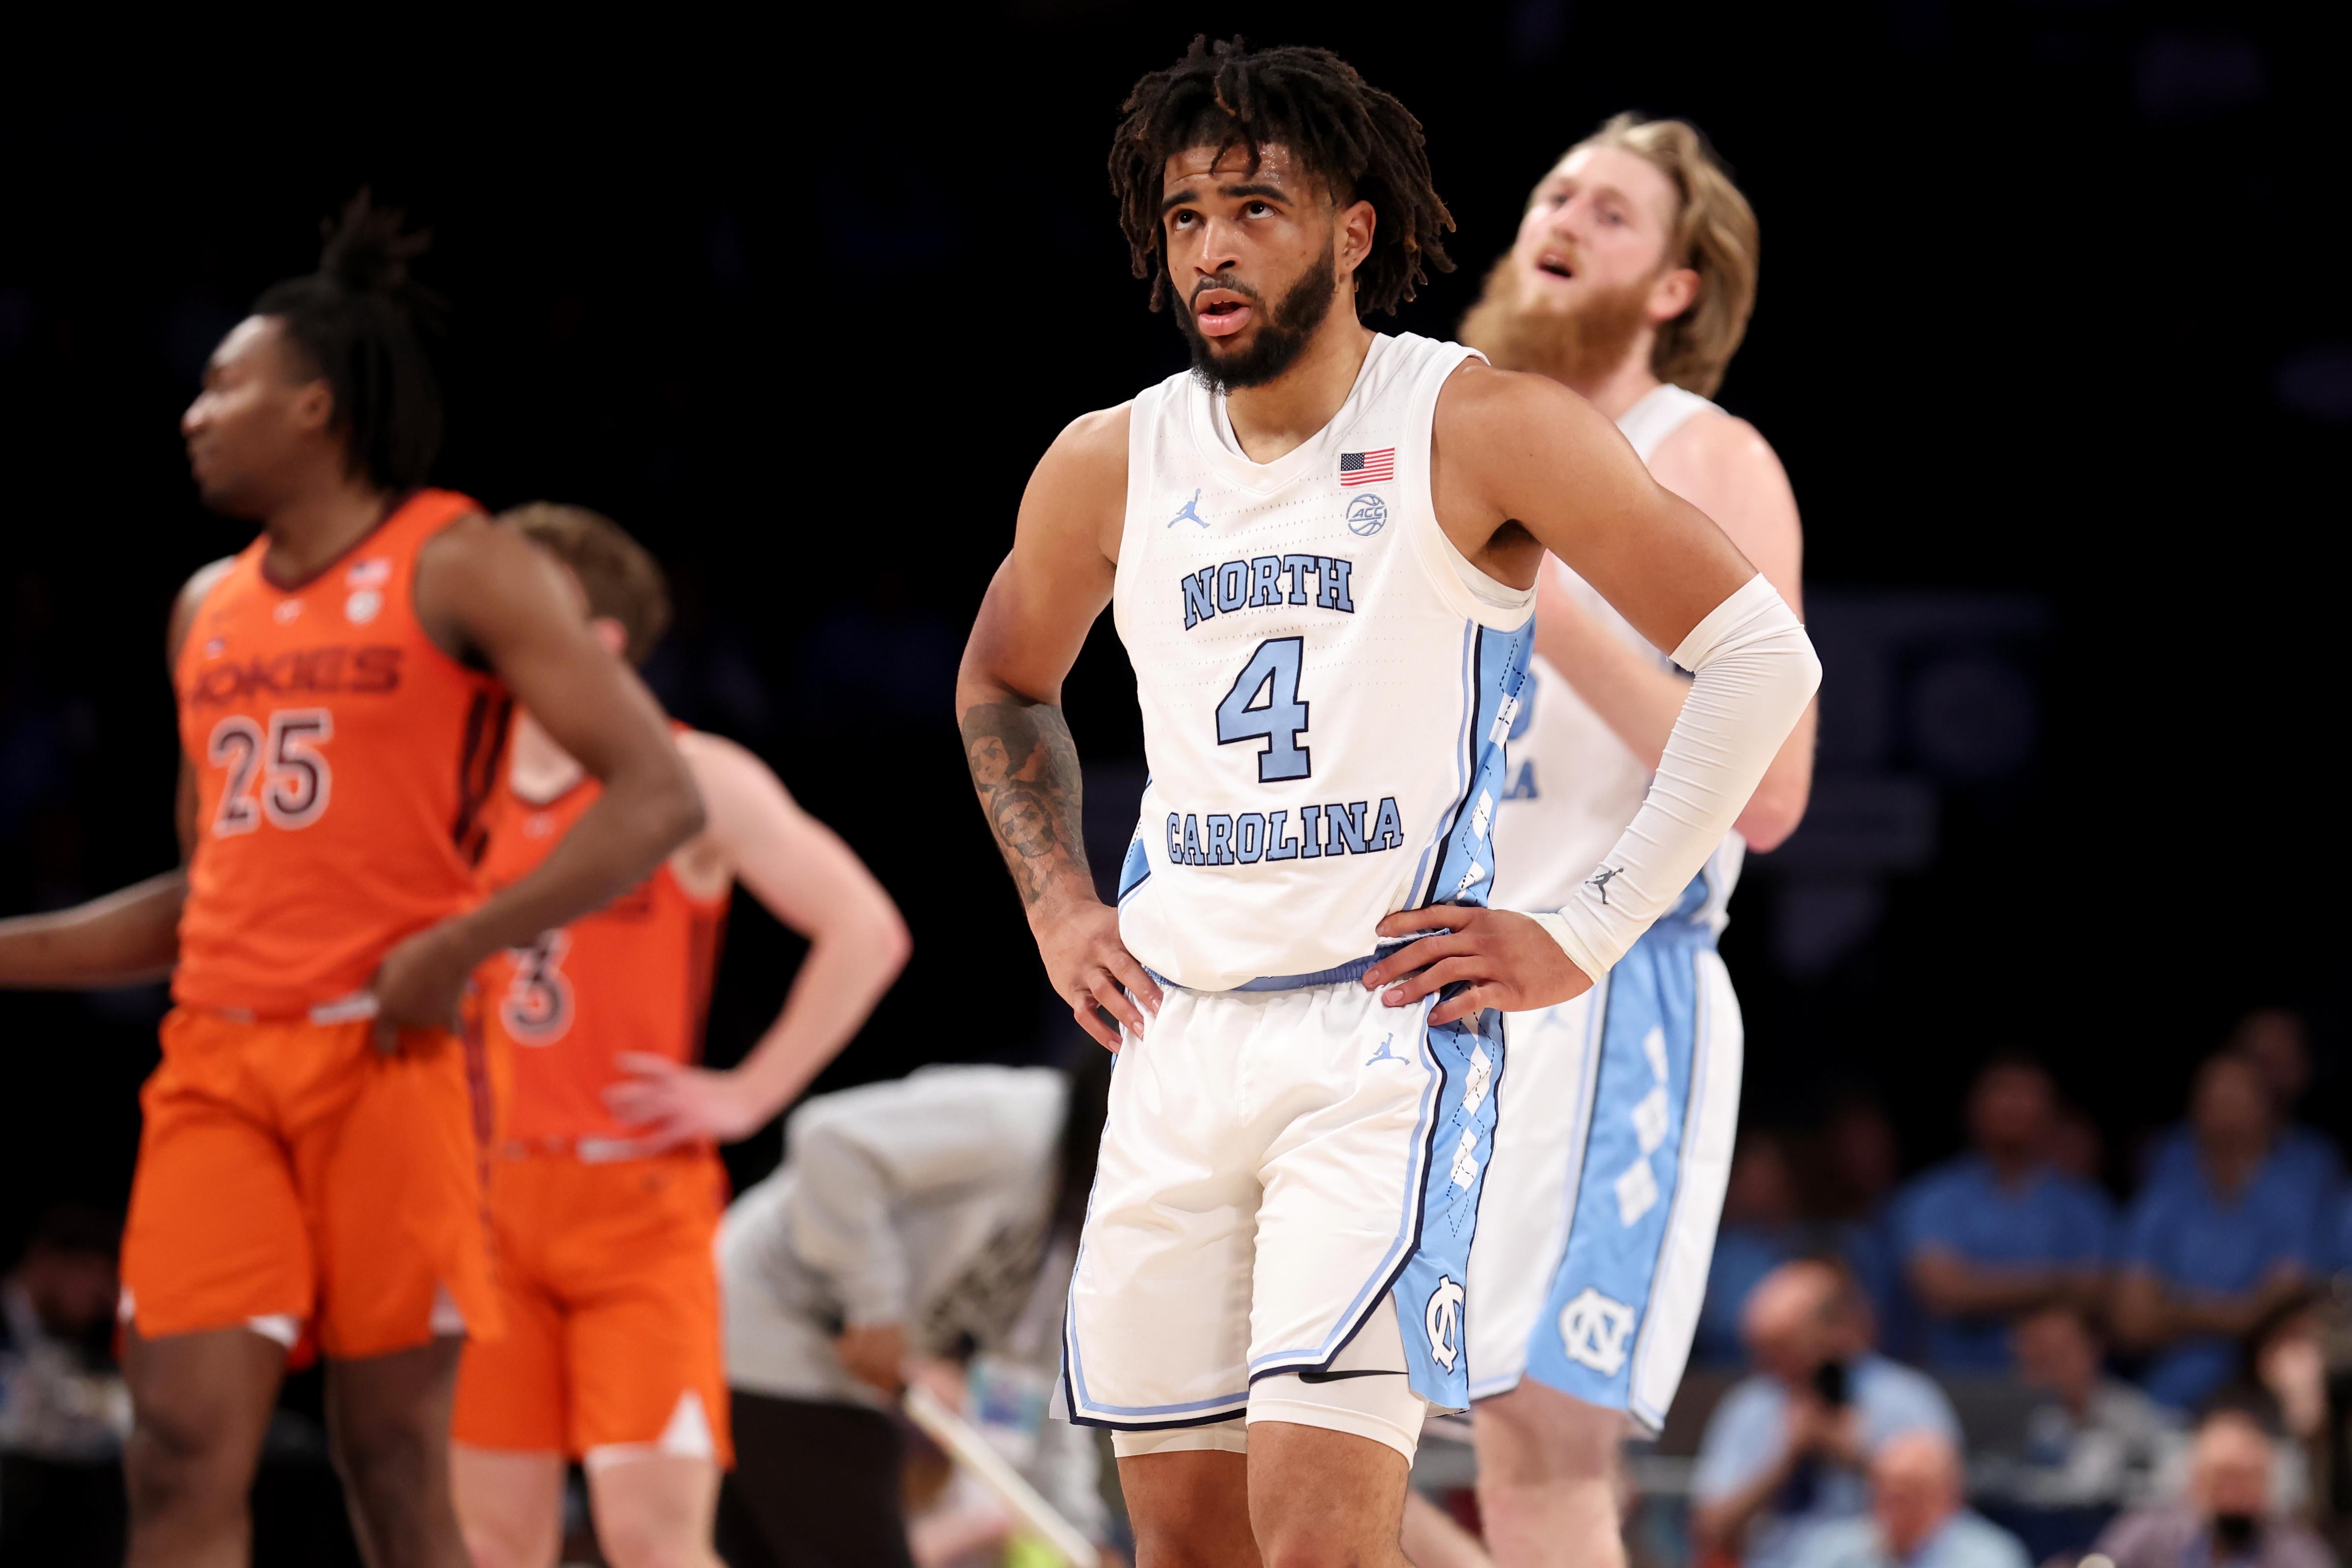 UNC March Madness Schedule Next Game Time, Date, TV Channel for 2022